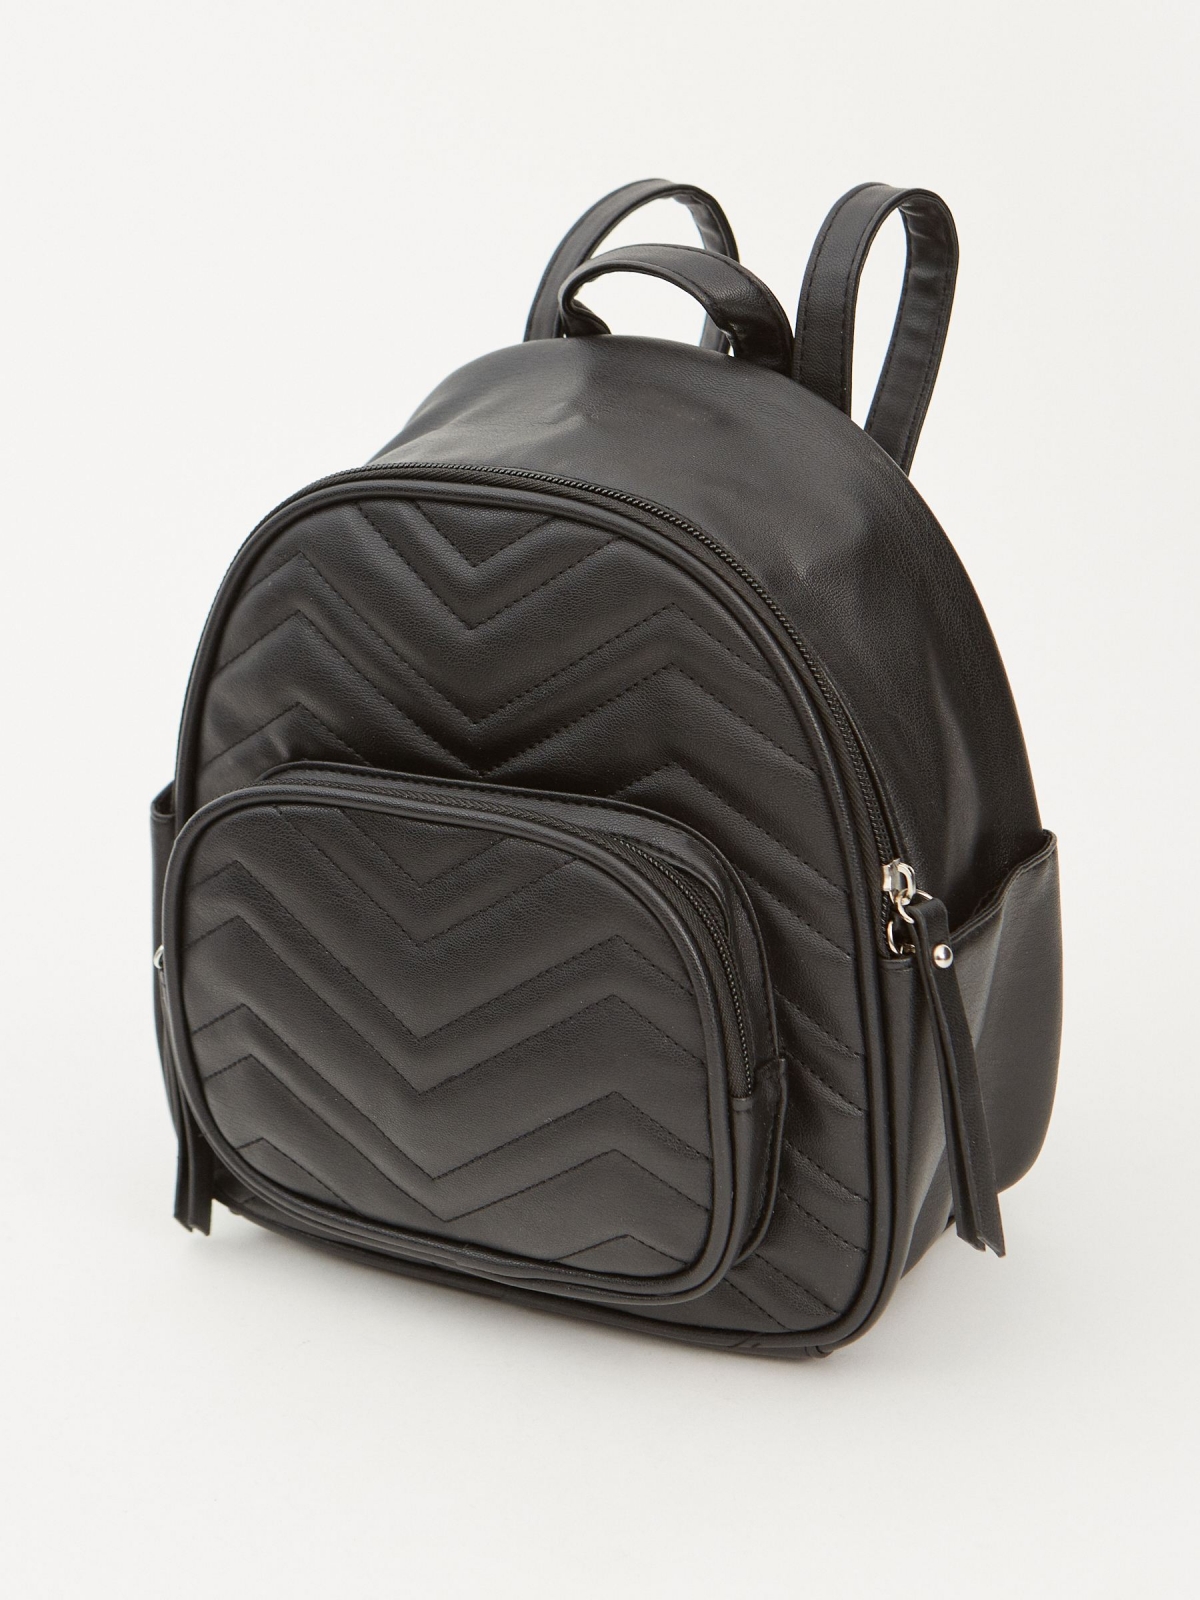 Quilted leather effect backpack black back view